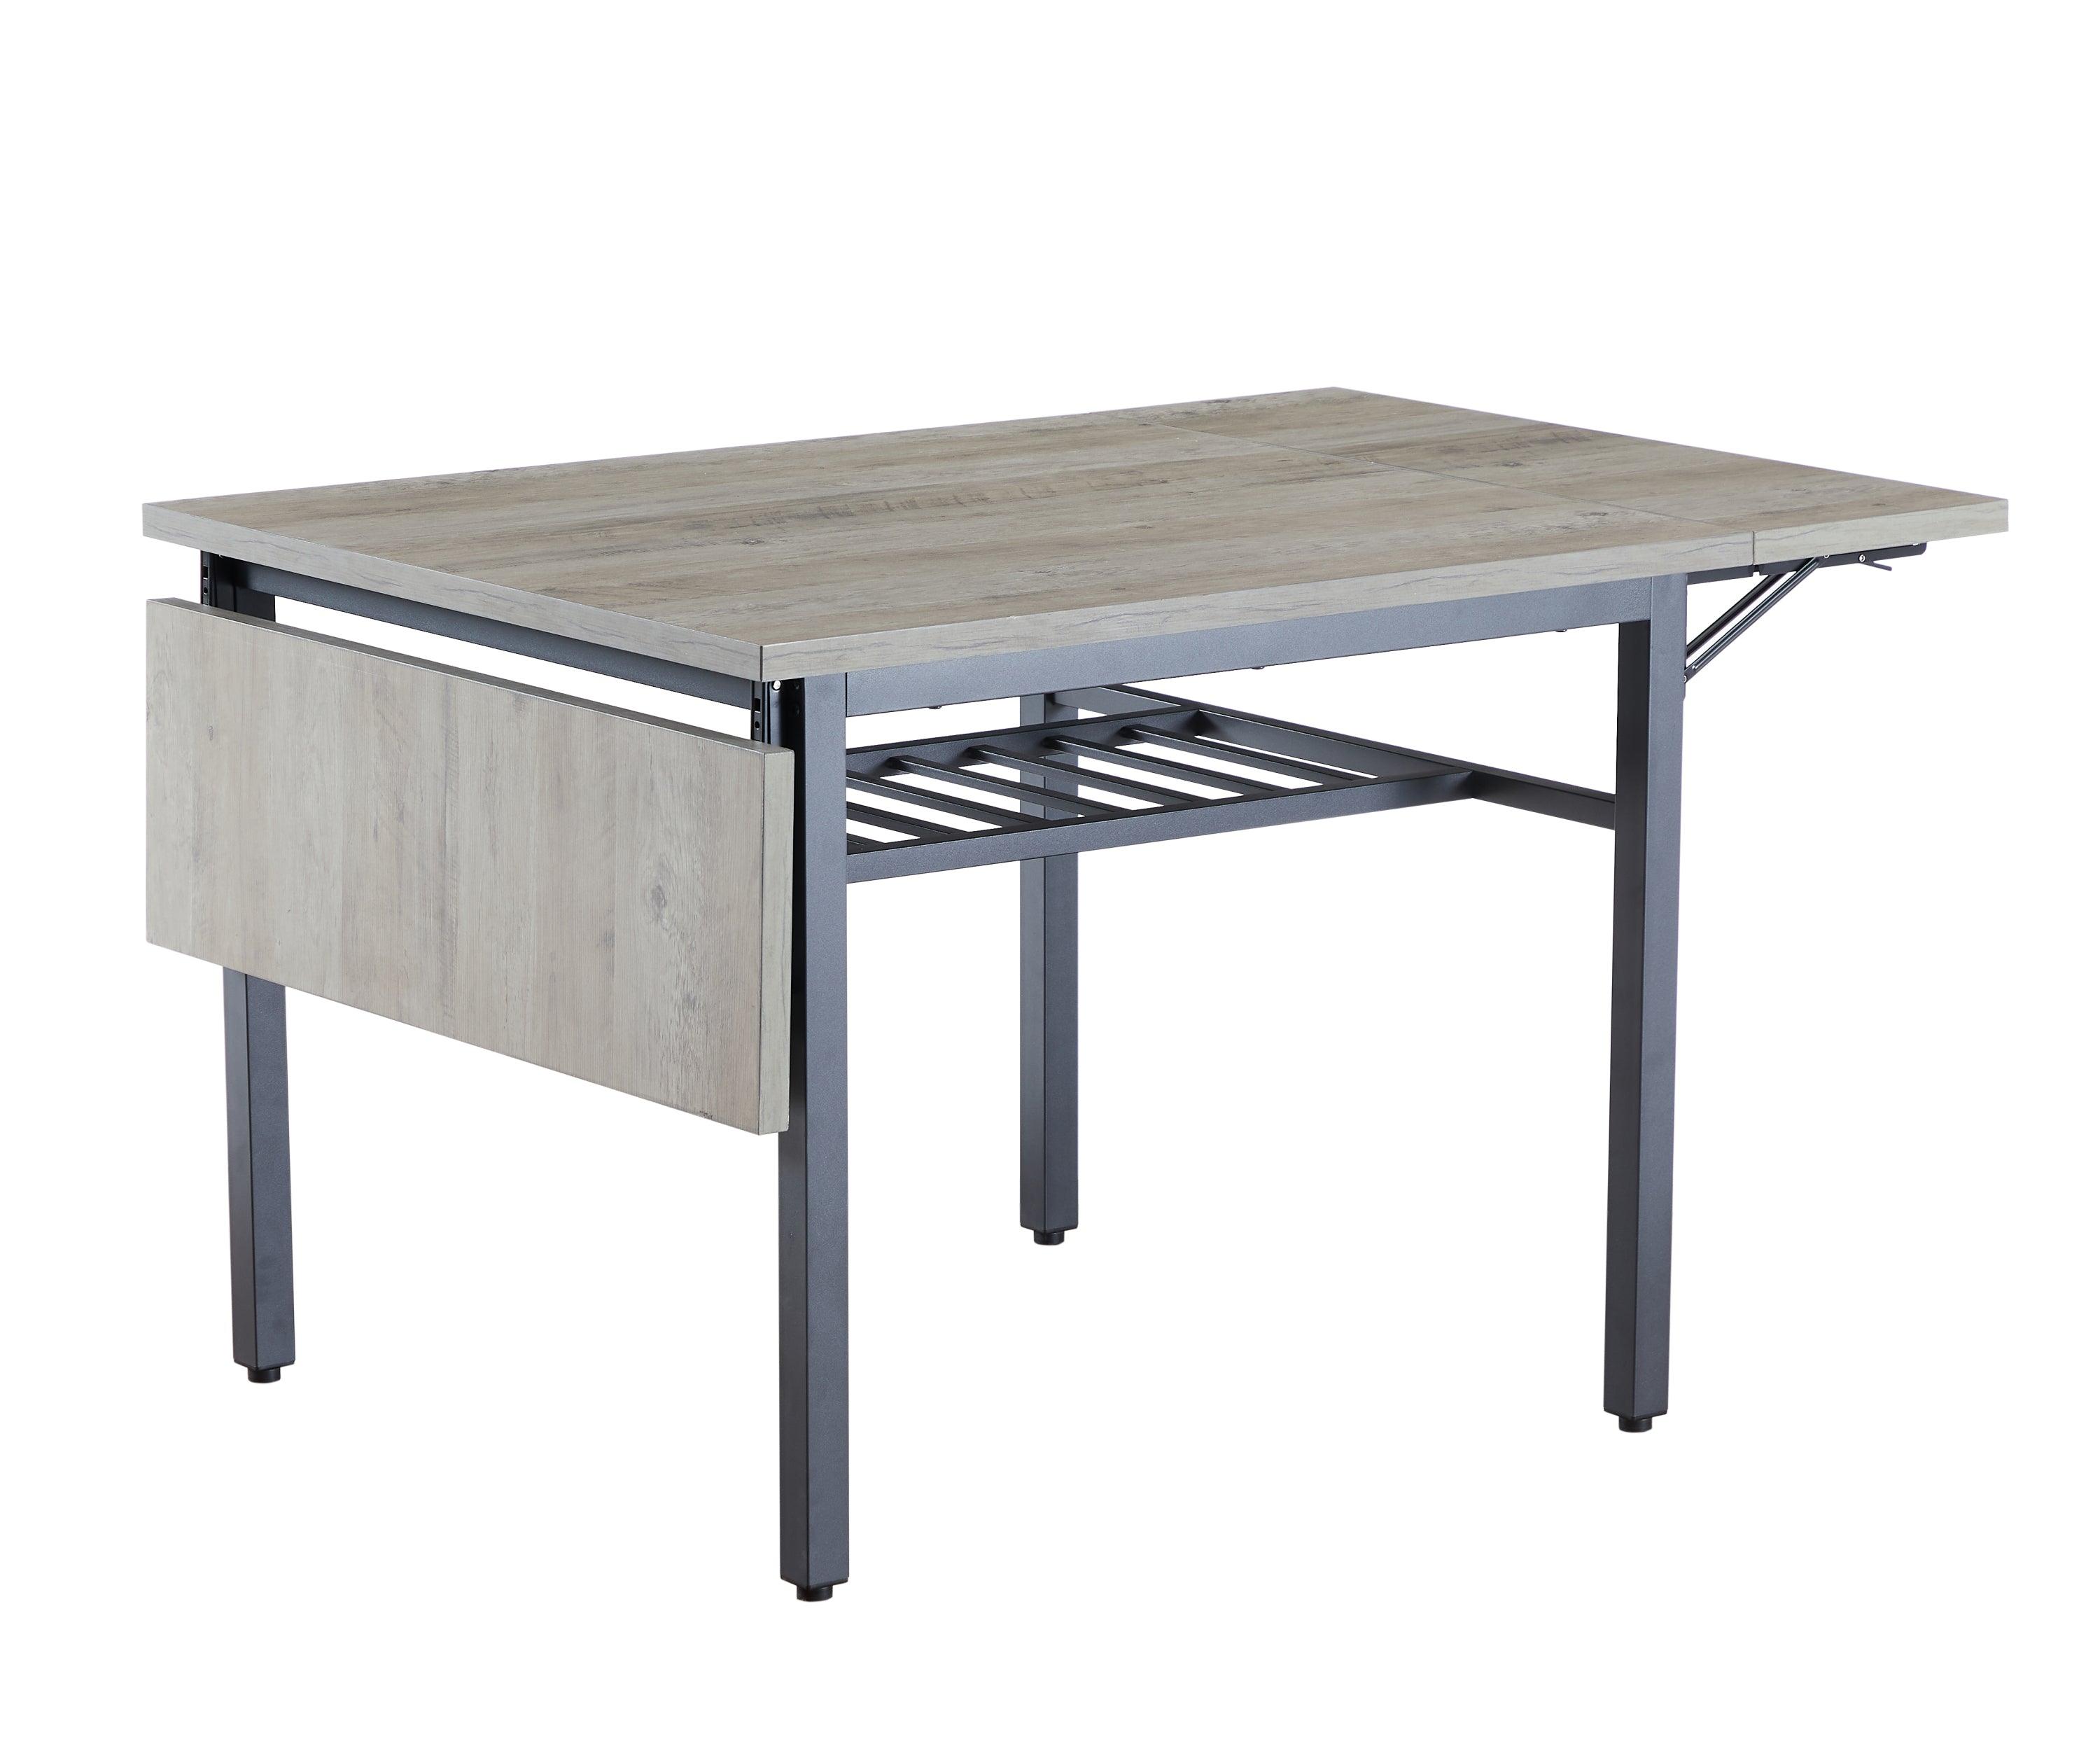 Folding Dining Table, 1.2 Inches Thick Table Top, For Dining Room, Living Room, Grey, 63.2'' L X 35.5'' W X 30.5'' H.